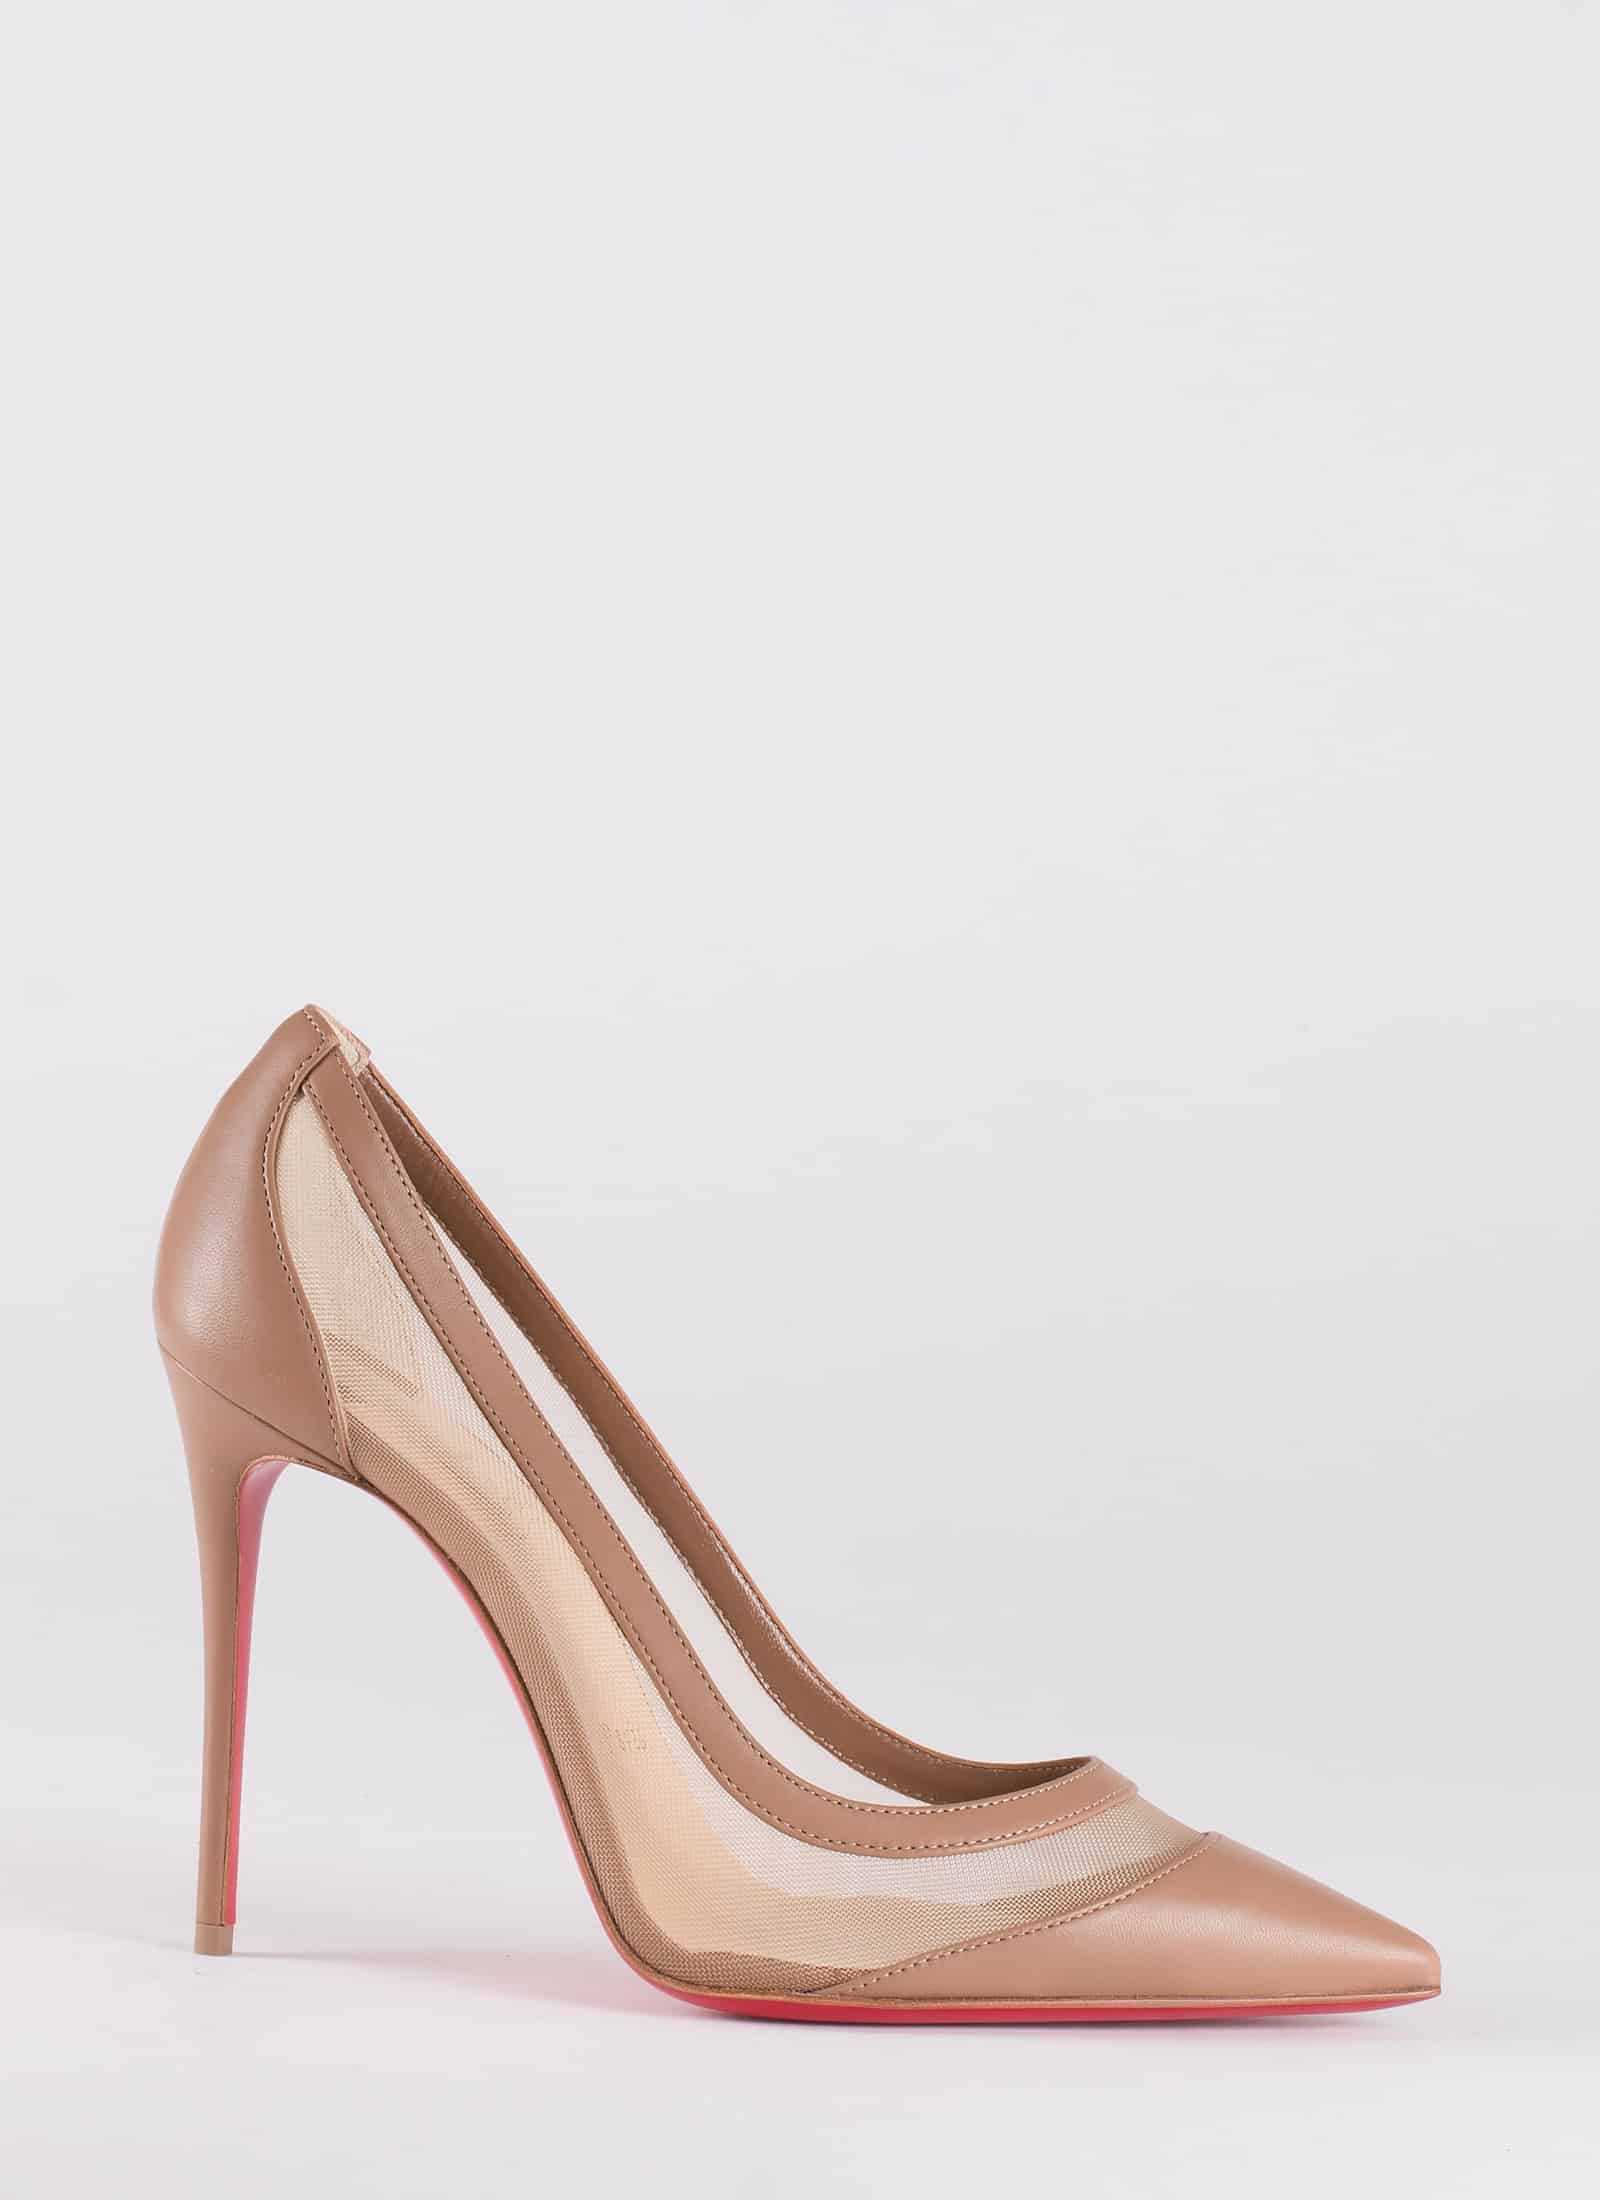 LEATHER SHOES - CHRISTIAN LOUBOUTIN